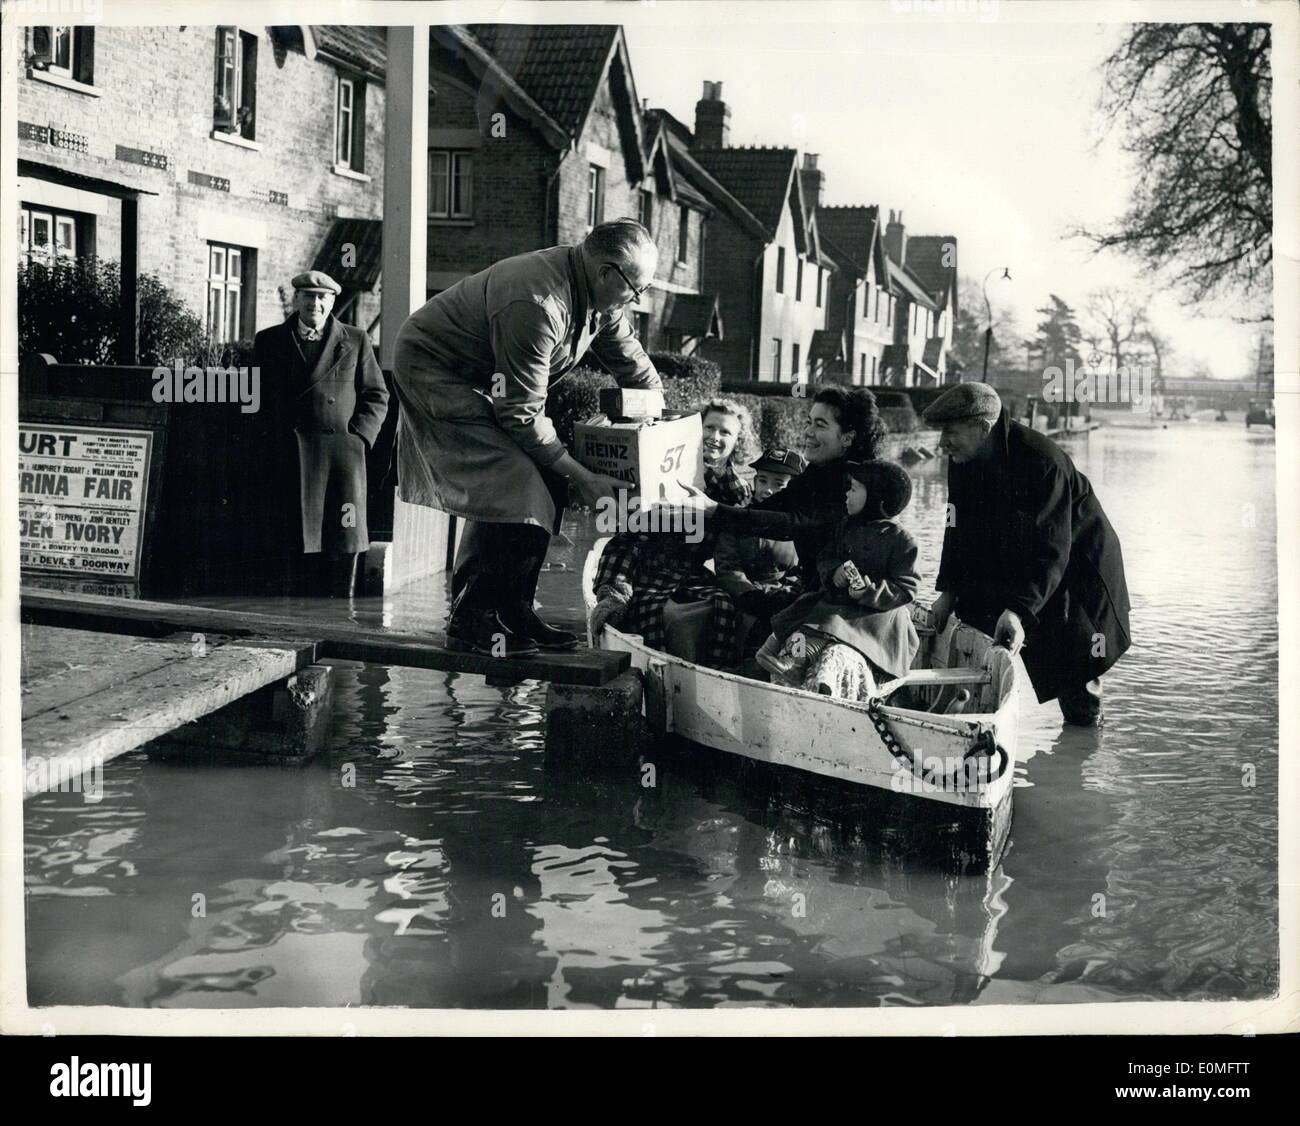 Jan. 01, 1955 - They Call This Highway - ''Summer Road''. Floods In East Molesey: Many residents of East Molesey, Surrey have to use boats when shopping these days - owing to the flood waters which this covered much of the surrounding areas- following the overflowing of the River Molesey. It is said that the flooding in the area is the worst for thirty years. Photo shows Mr. Tom Edwards a tradesman delivers a box full of groceries to Mrs. Barbara Marty who holds her three year old son Barry on her knee - as the latter goes shopping by boat - in flooded Summer Road, East Molesey. Stock Photo